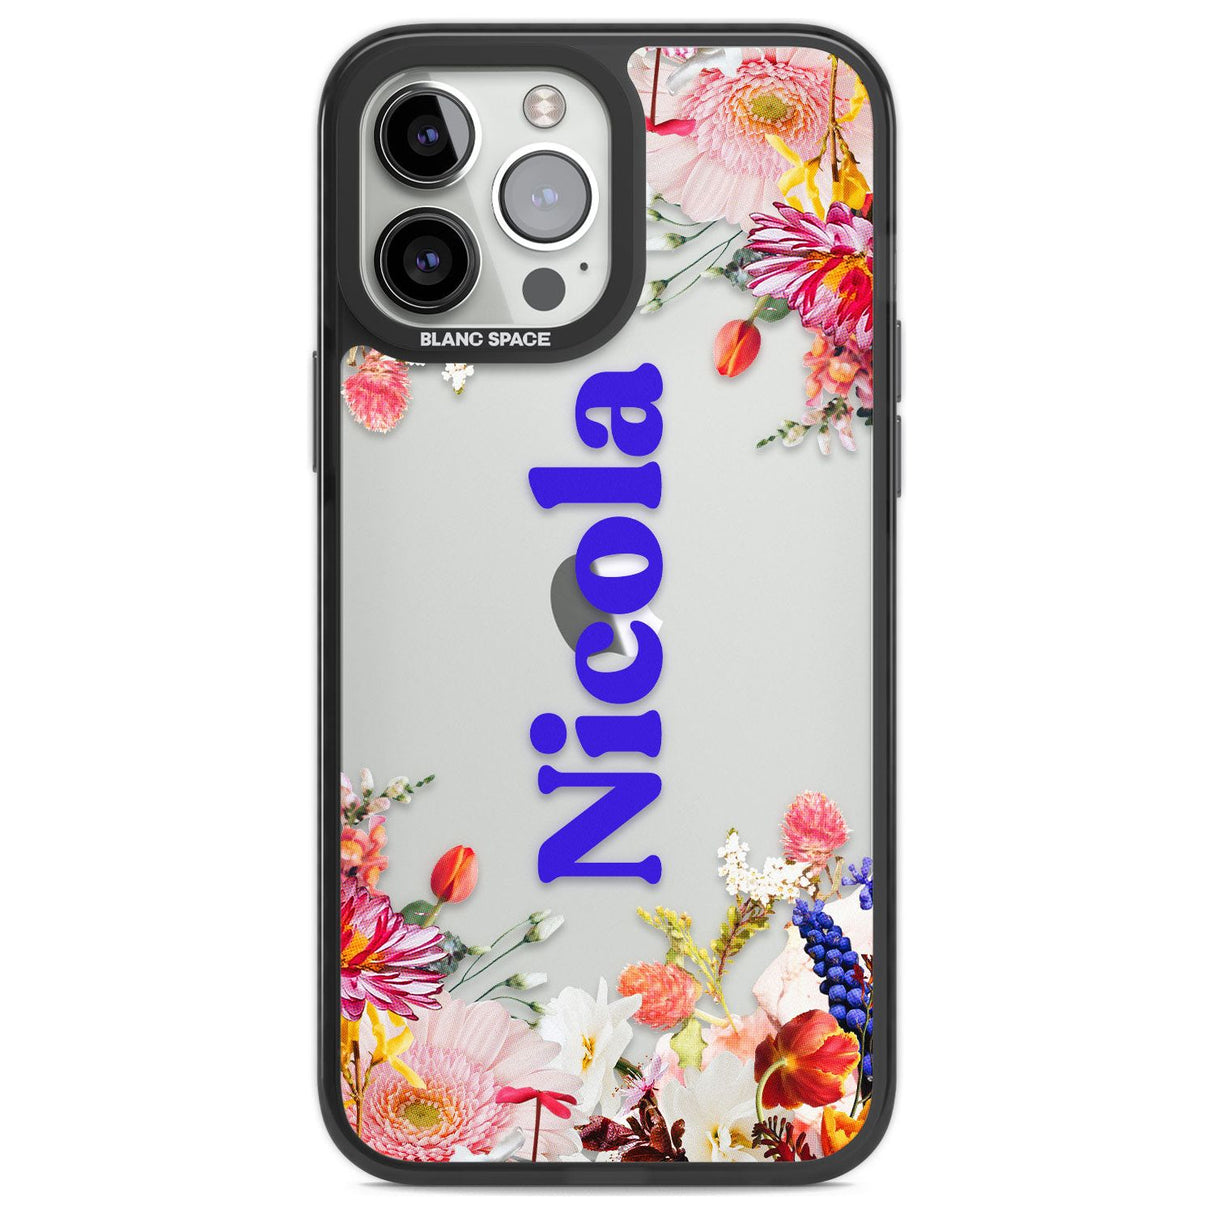 Personalised Text with Floral Borders Custom Phone Case iPhone 13 Pro Max / Black Impact Case,iPhone 14 Pro Max / Black Impact Case Blanc Space